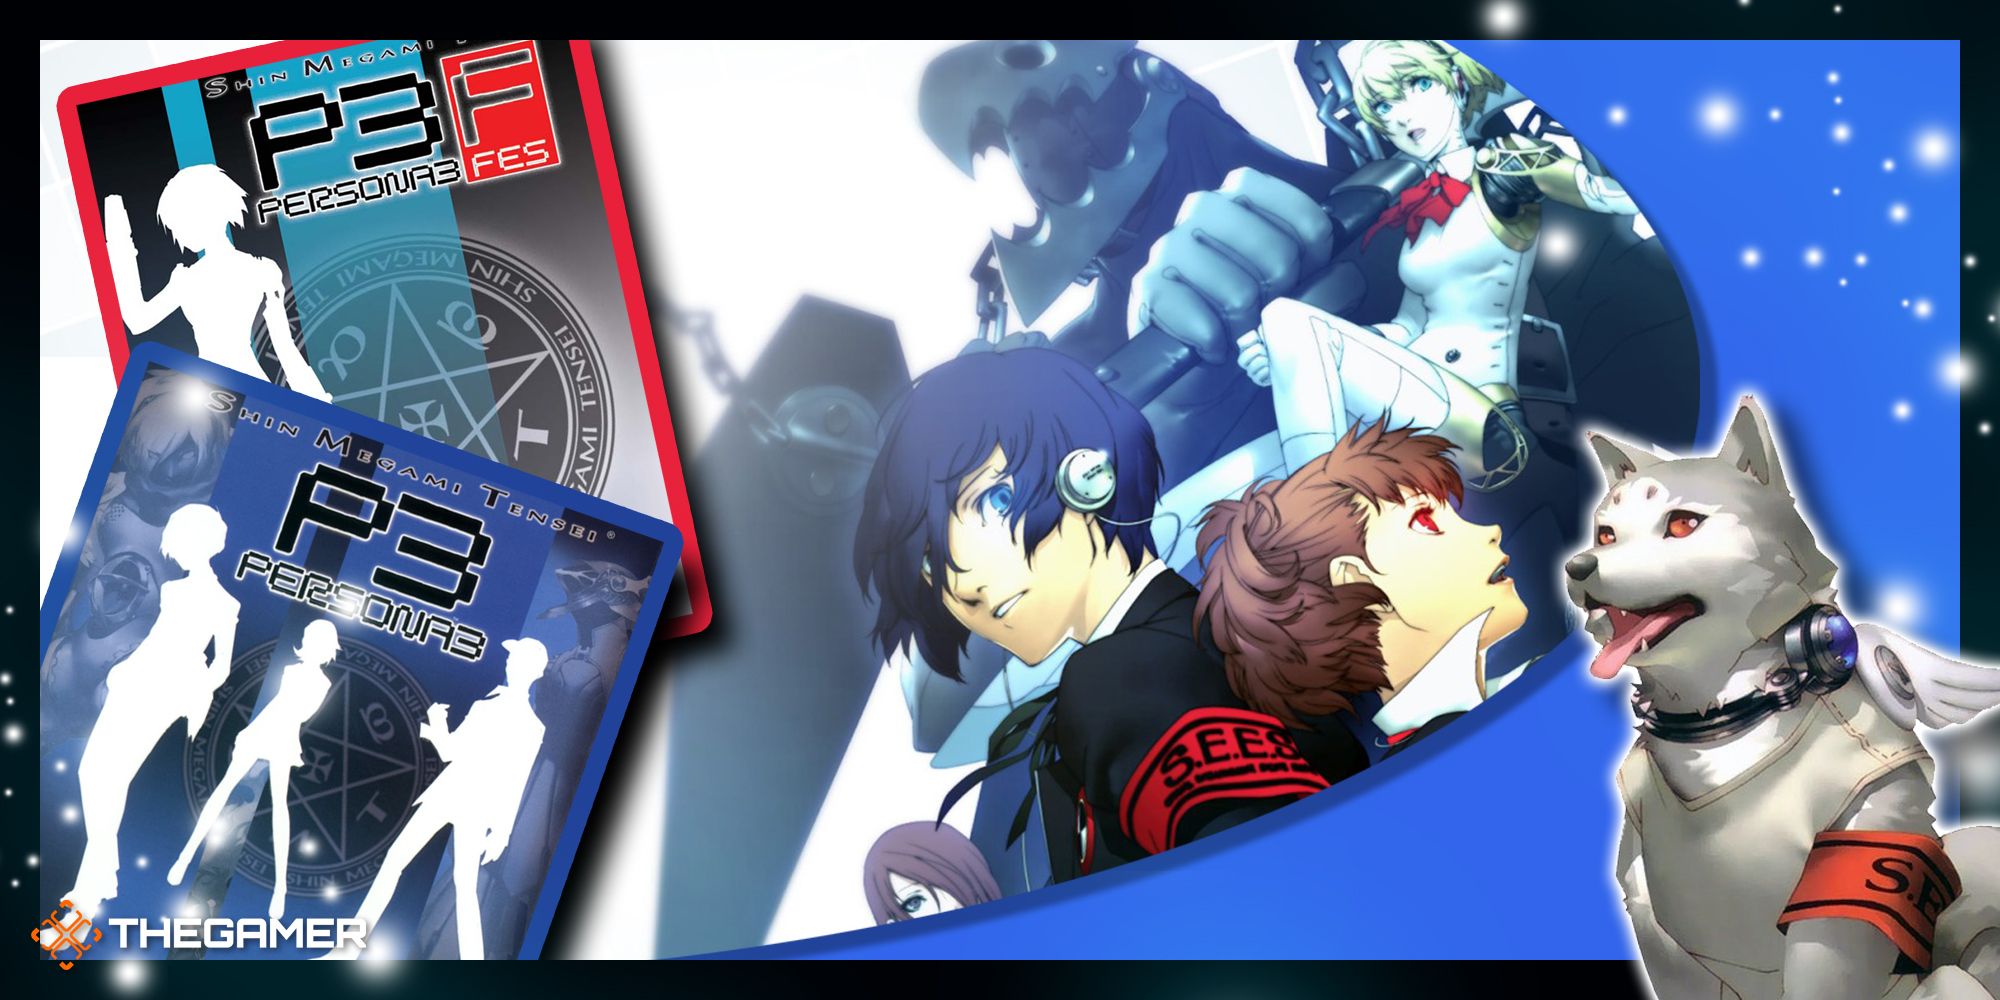 Persona 3: The Differences between the Original, FES, and Portable